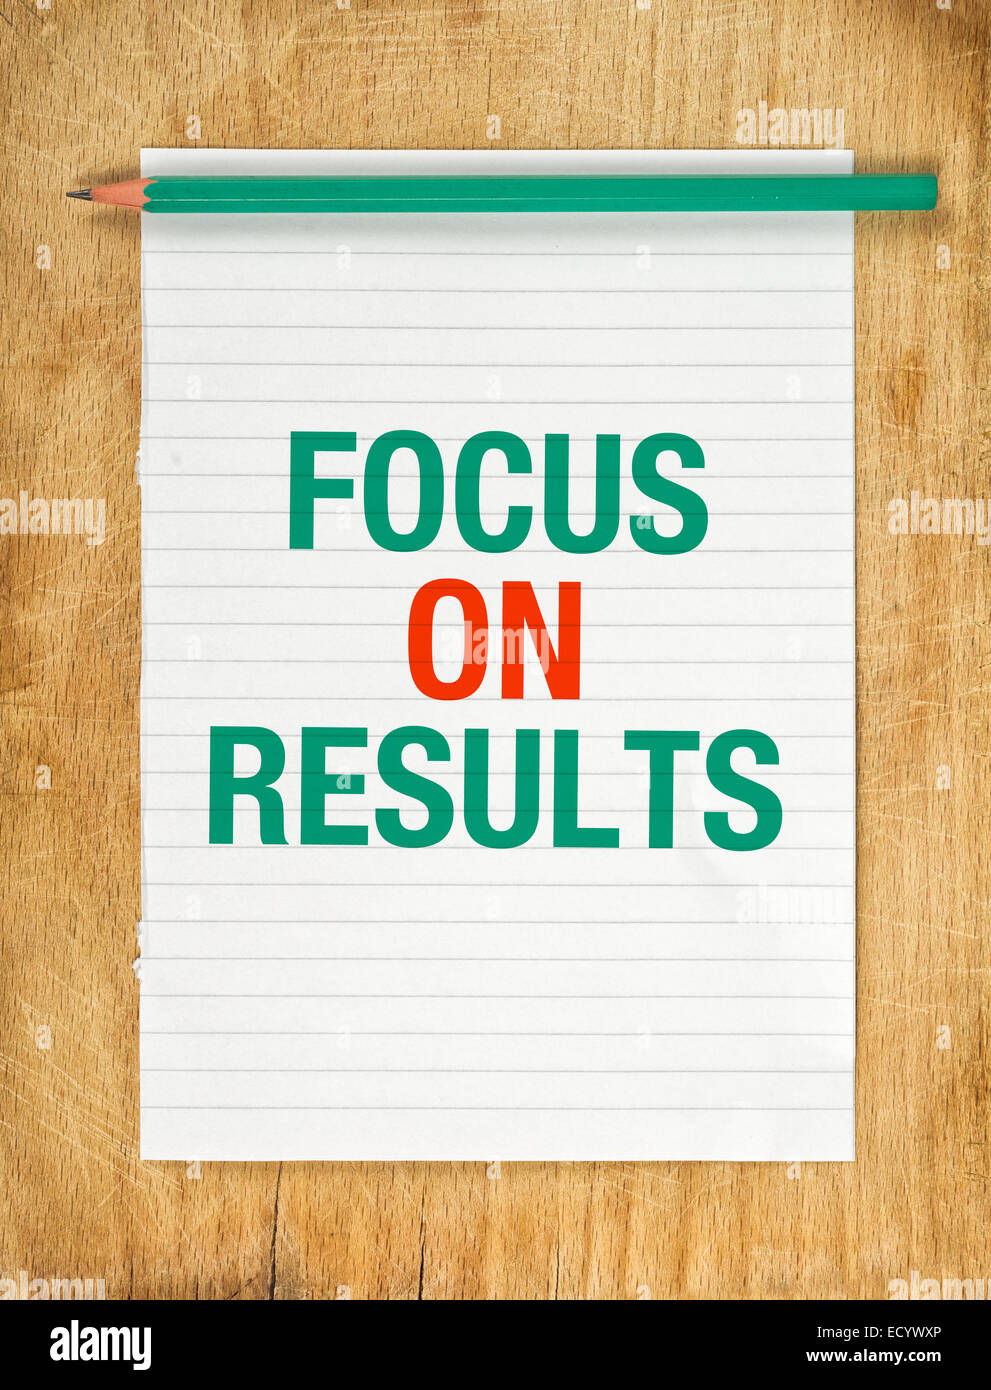 Focus On Results Message on Note Paper with Pencil on Wooden Office Table. Stock Photo